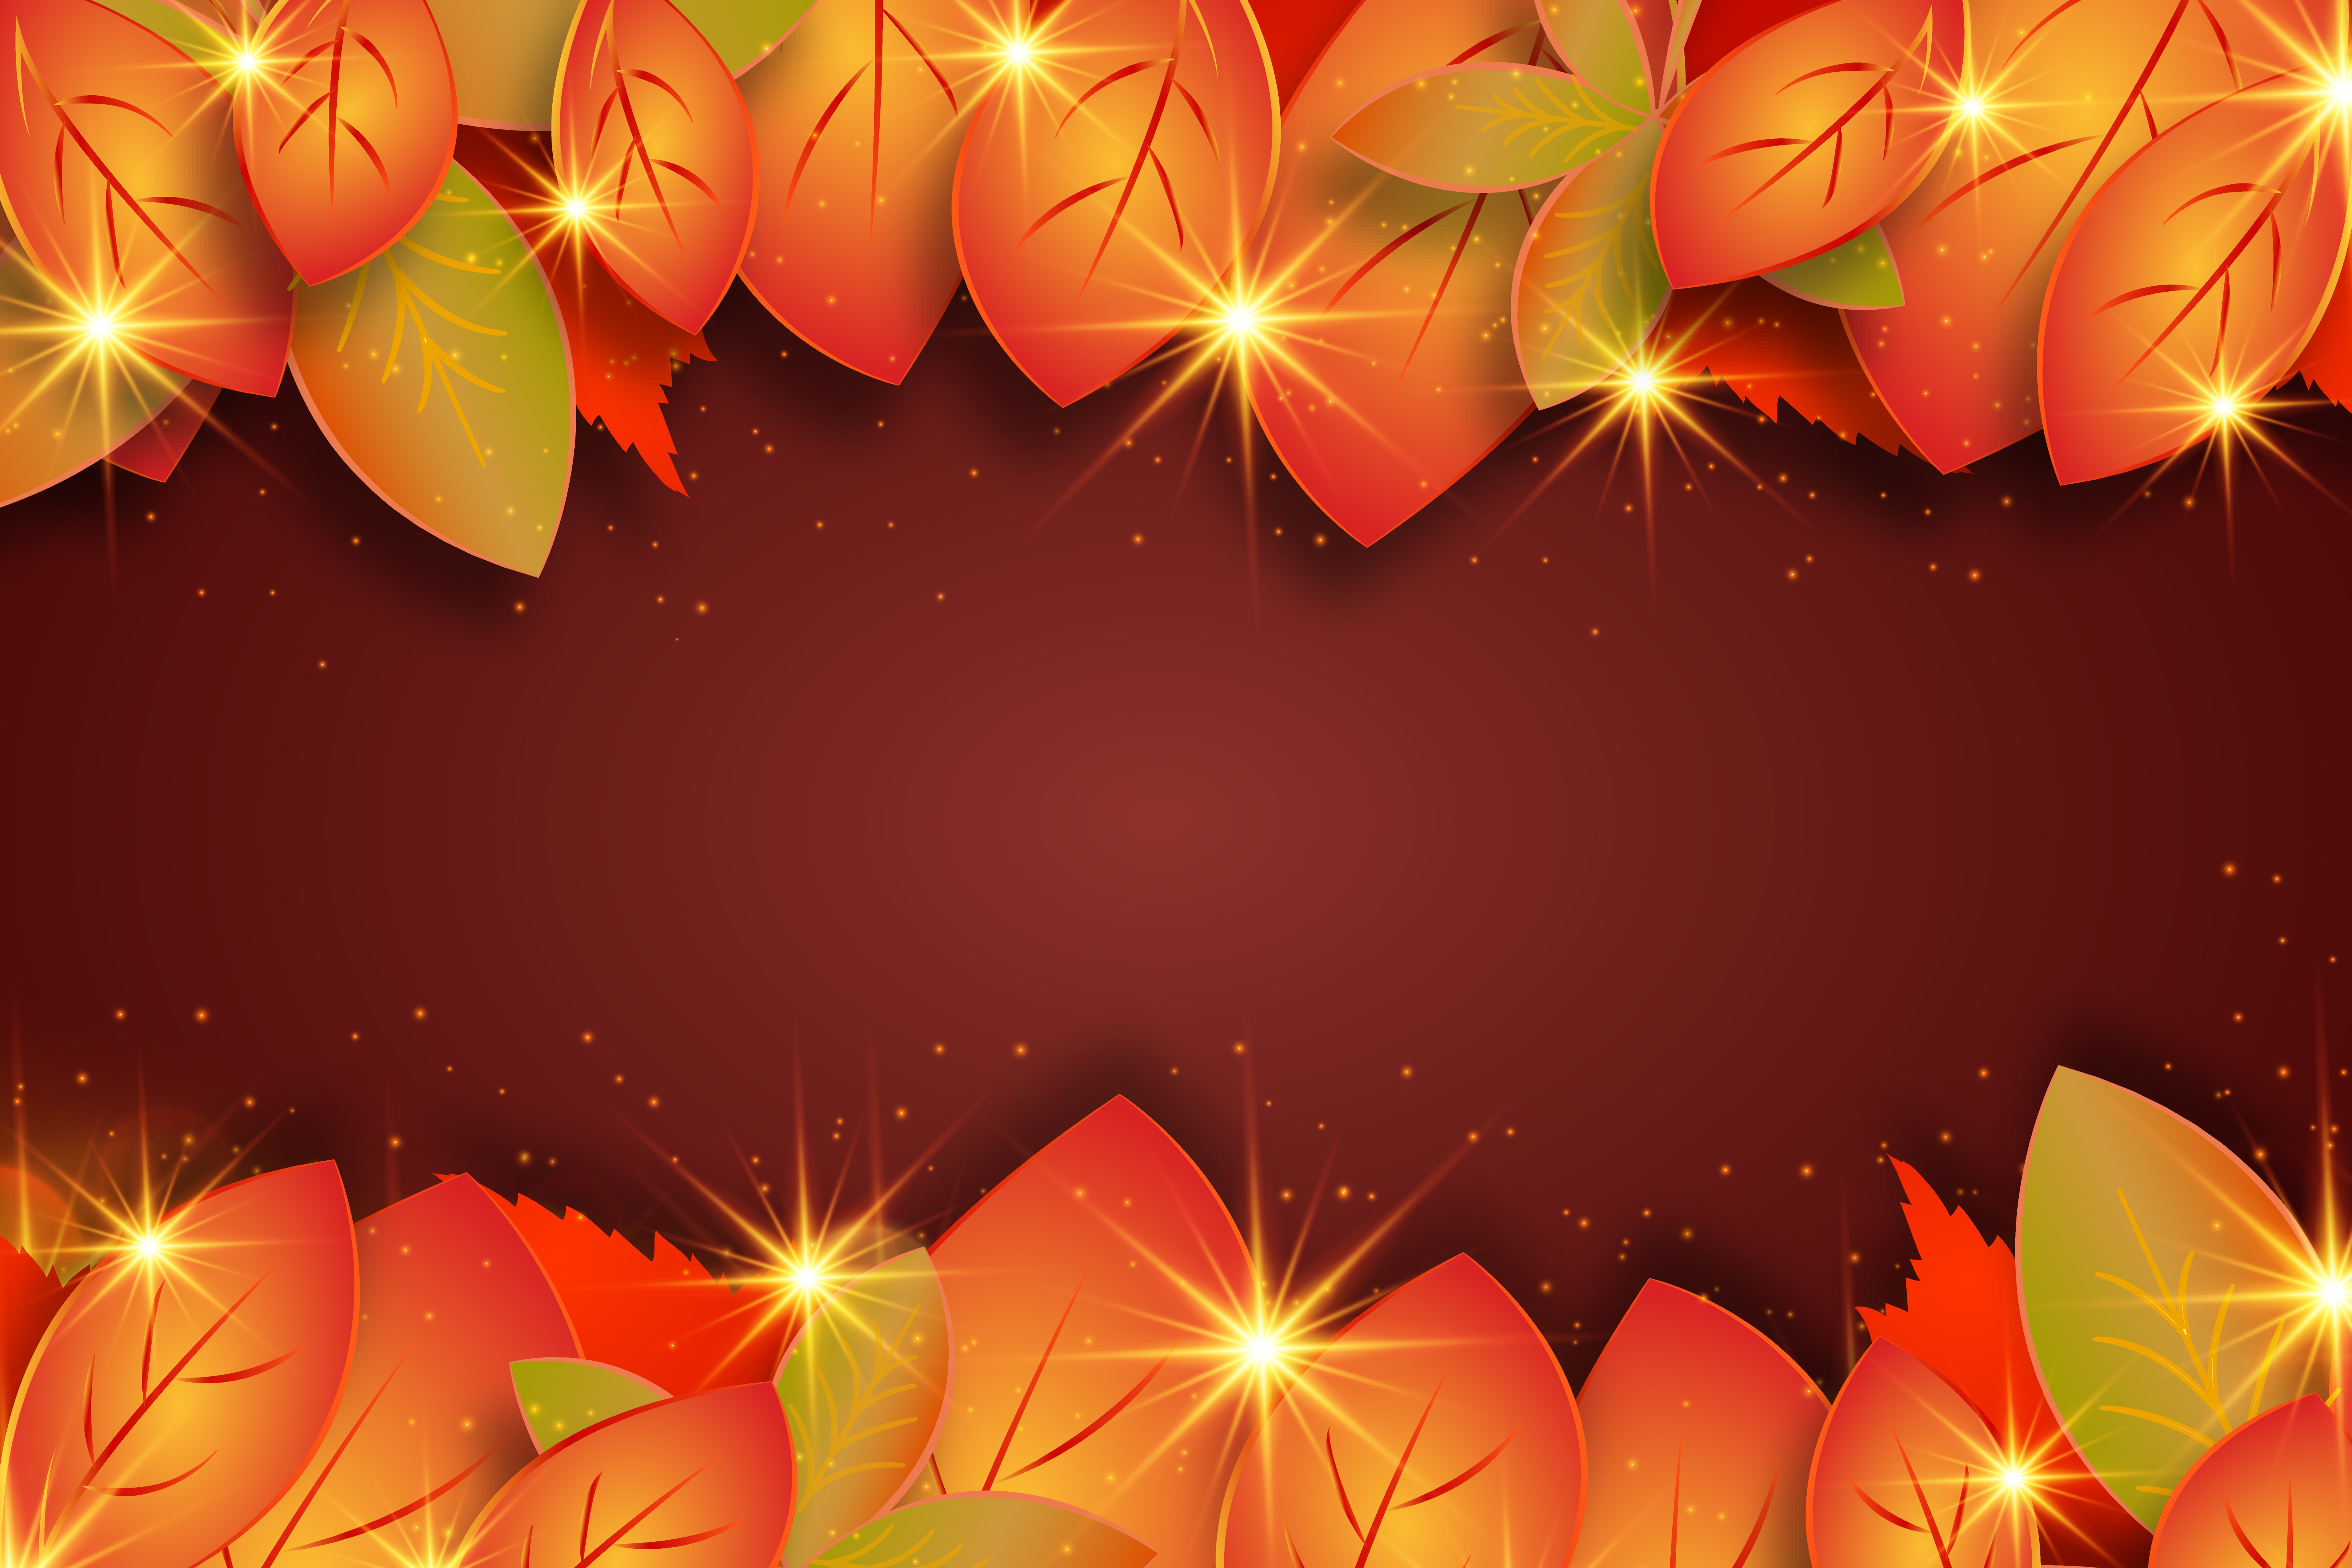 Free Image, thanksgiving, greetings, autumn, greeting, season, decoration, holiday, color, brown, fall, design, decorative, copyspace, celebration, leaves, happy, frame, background, ornament, sale, offer, banner, yellow, leaf, orange, petal, flower